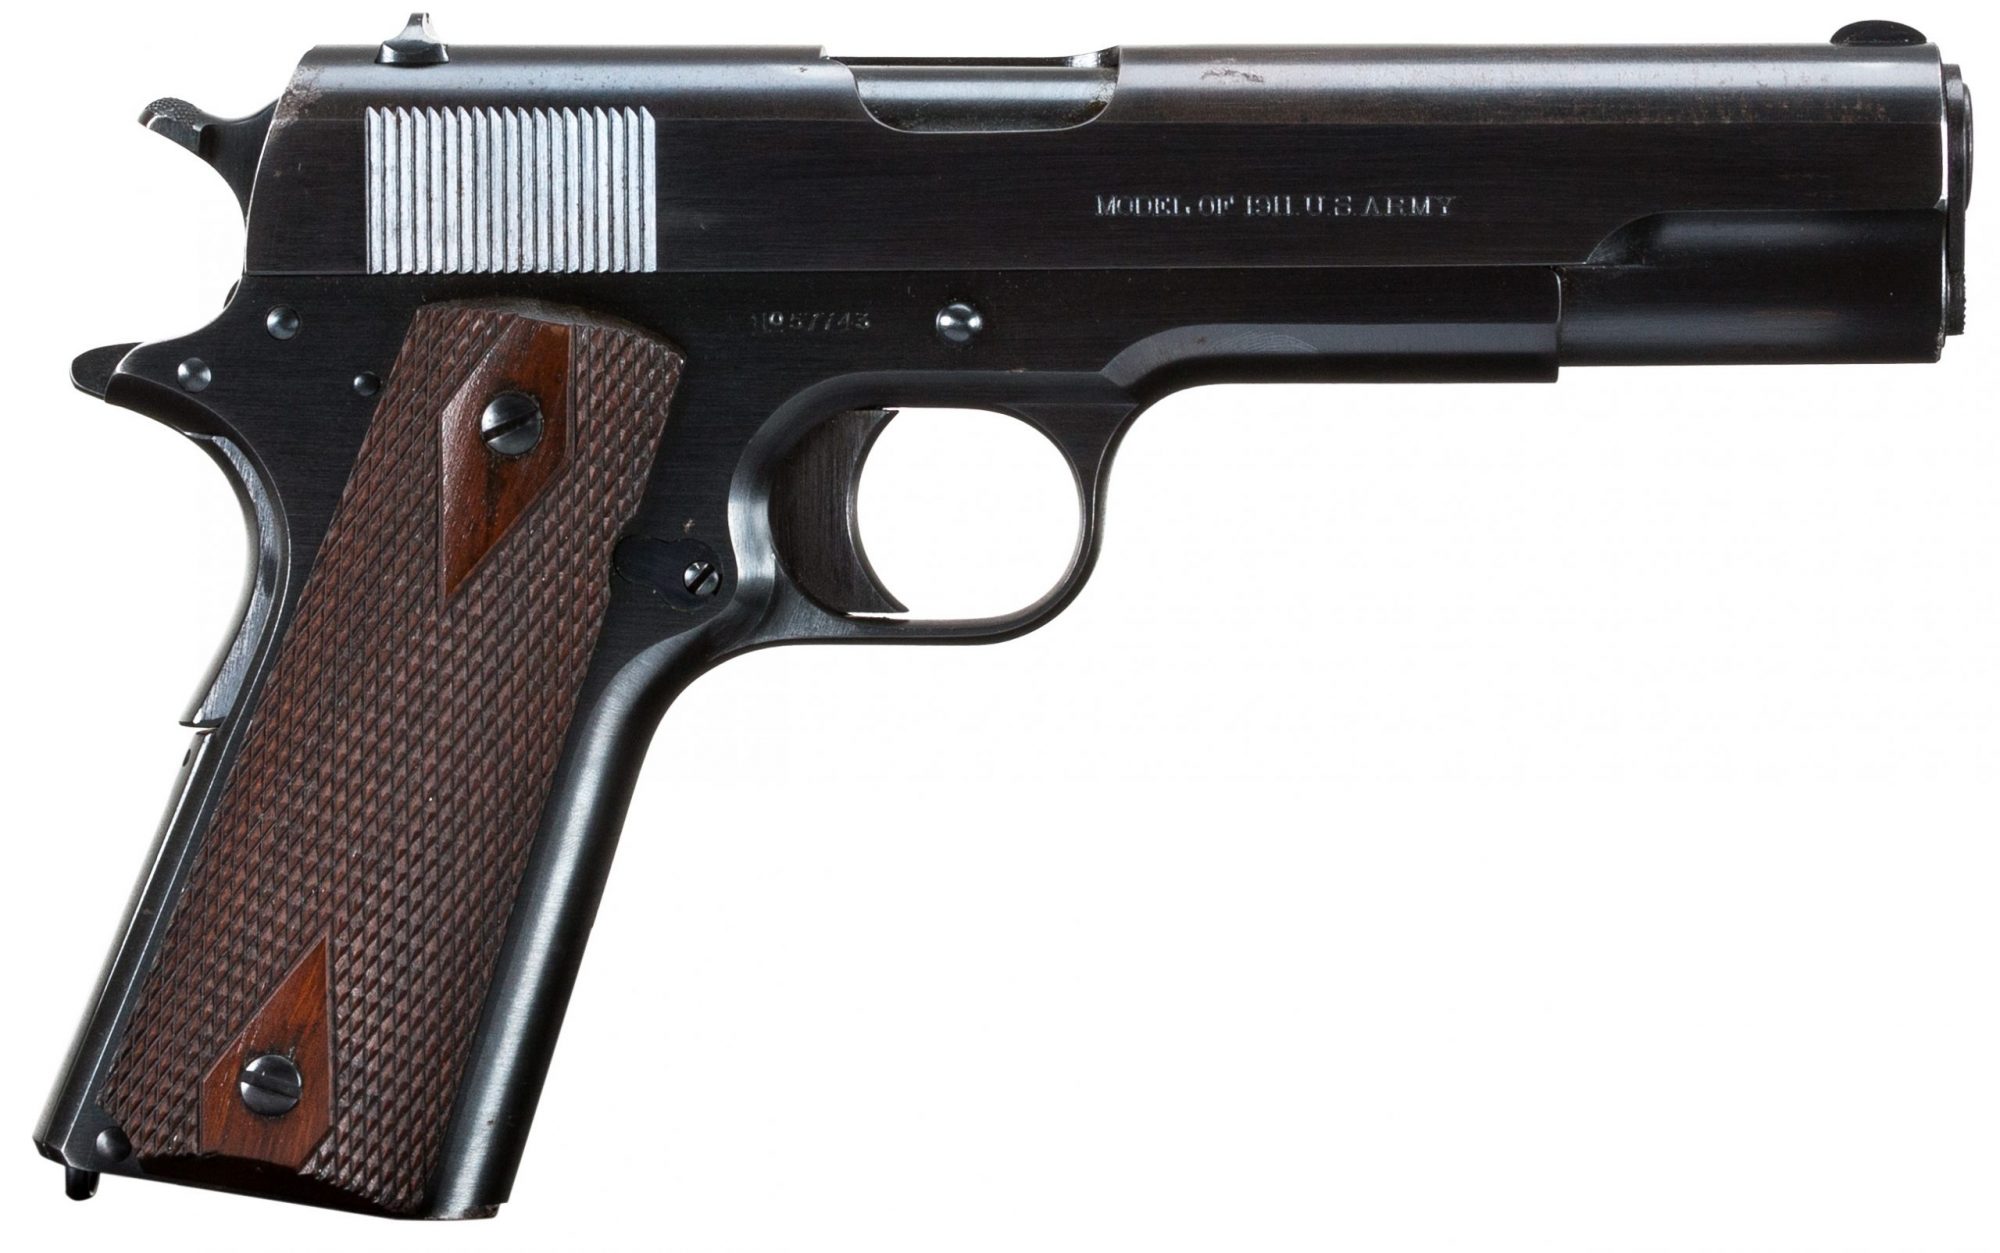 5290 Colt 1911 right side view